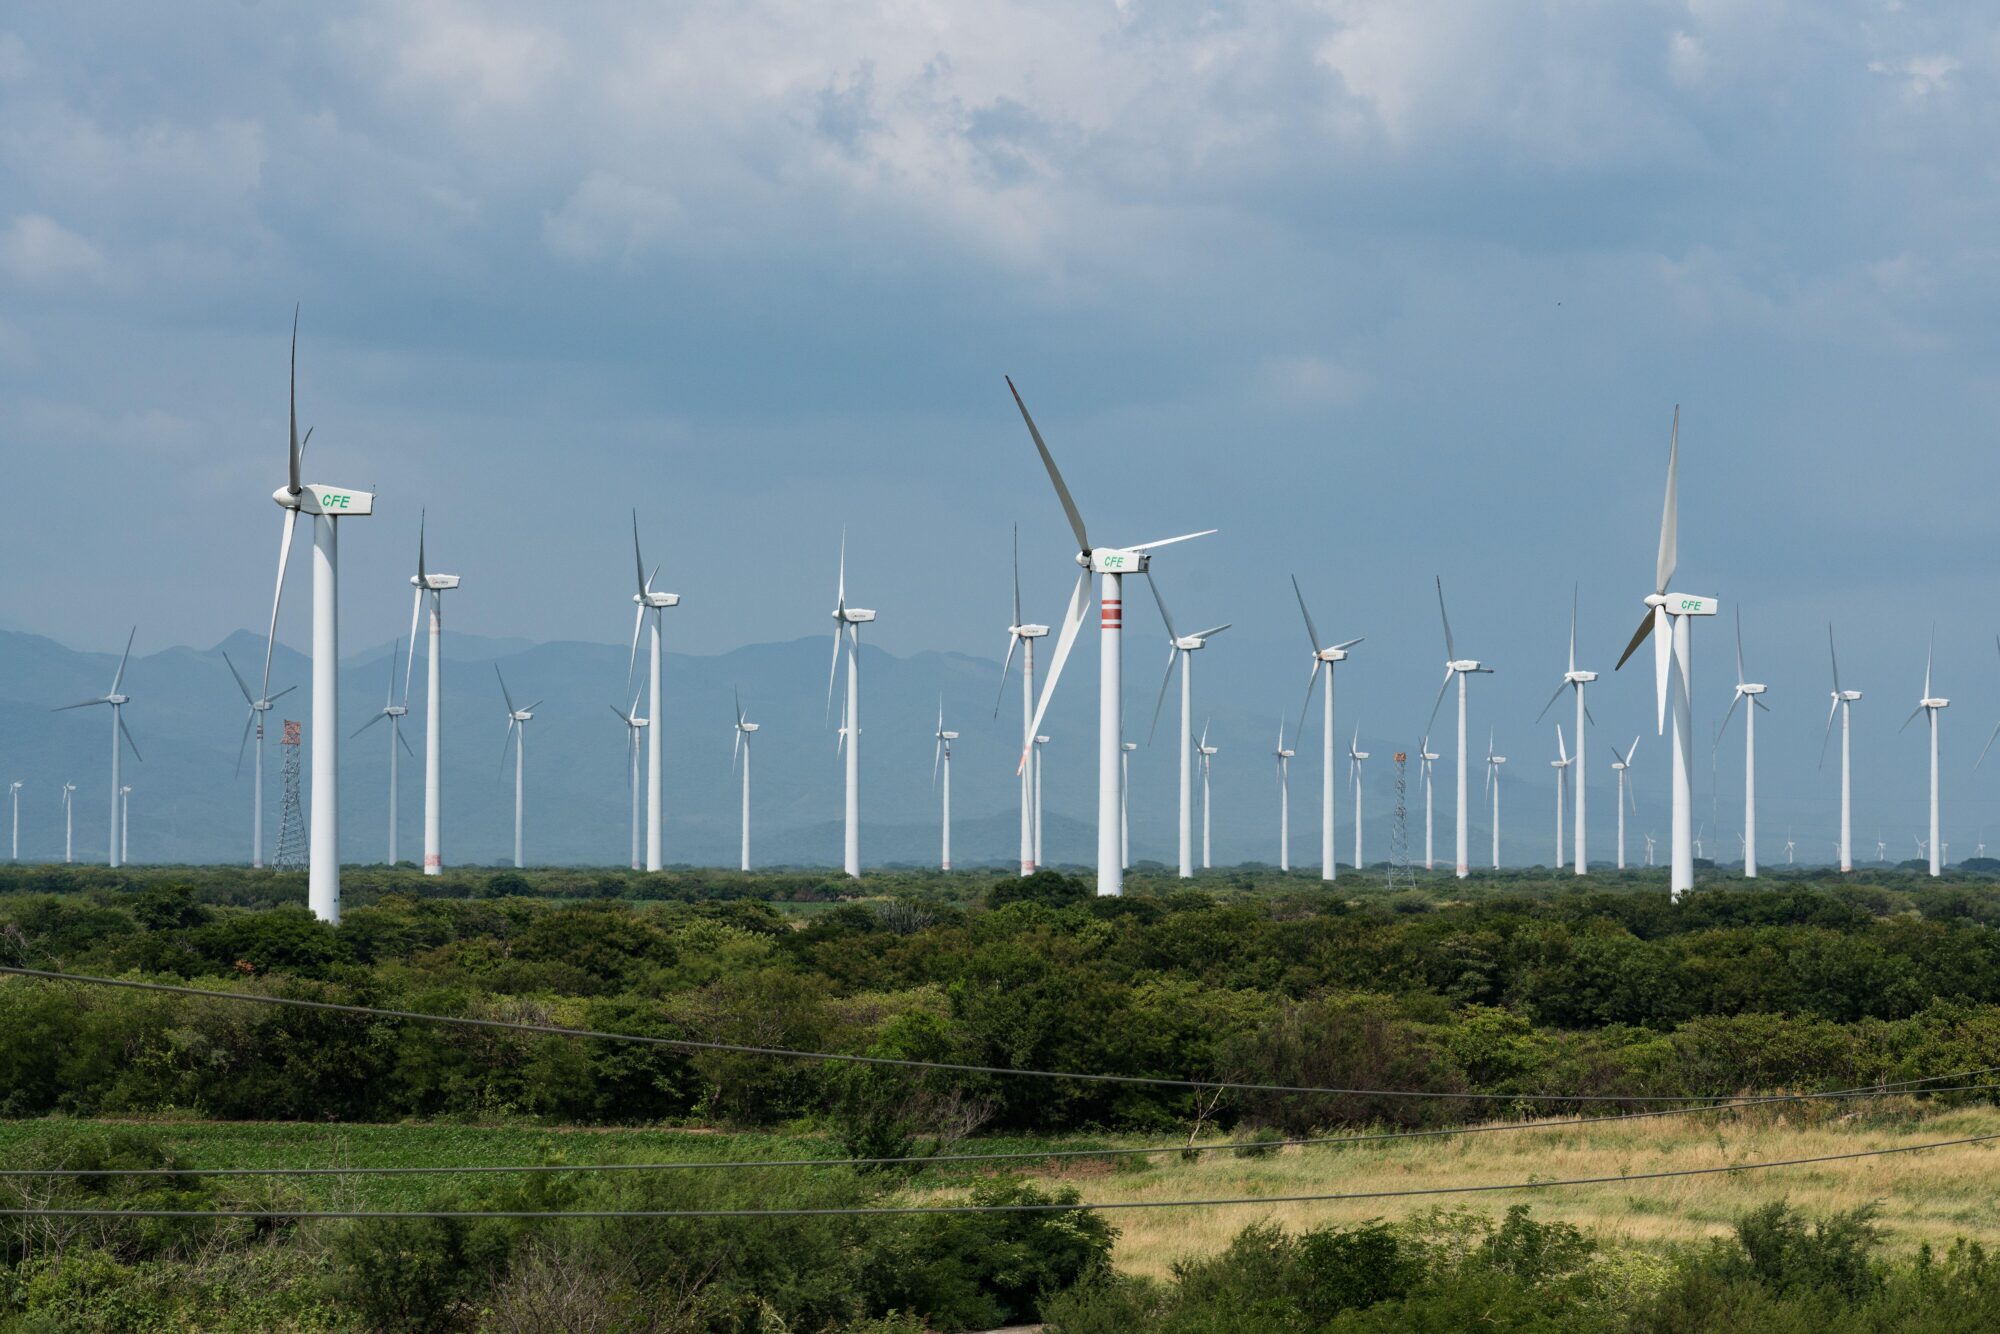 <p>Wind turbines in Oaxaca, Mexico. Investment in clean energy is one of the solutions to zero net emissions, according to the Inter-American Development Bank (Image: Jon G. Fuller/VWPics / Alamy)</p>